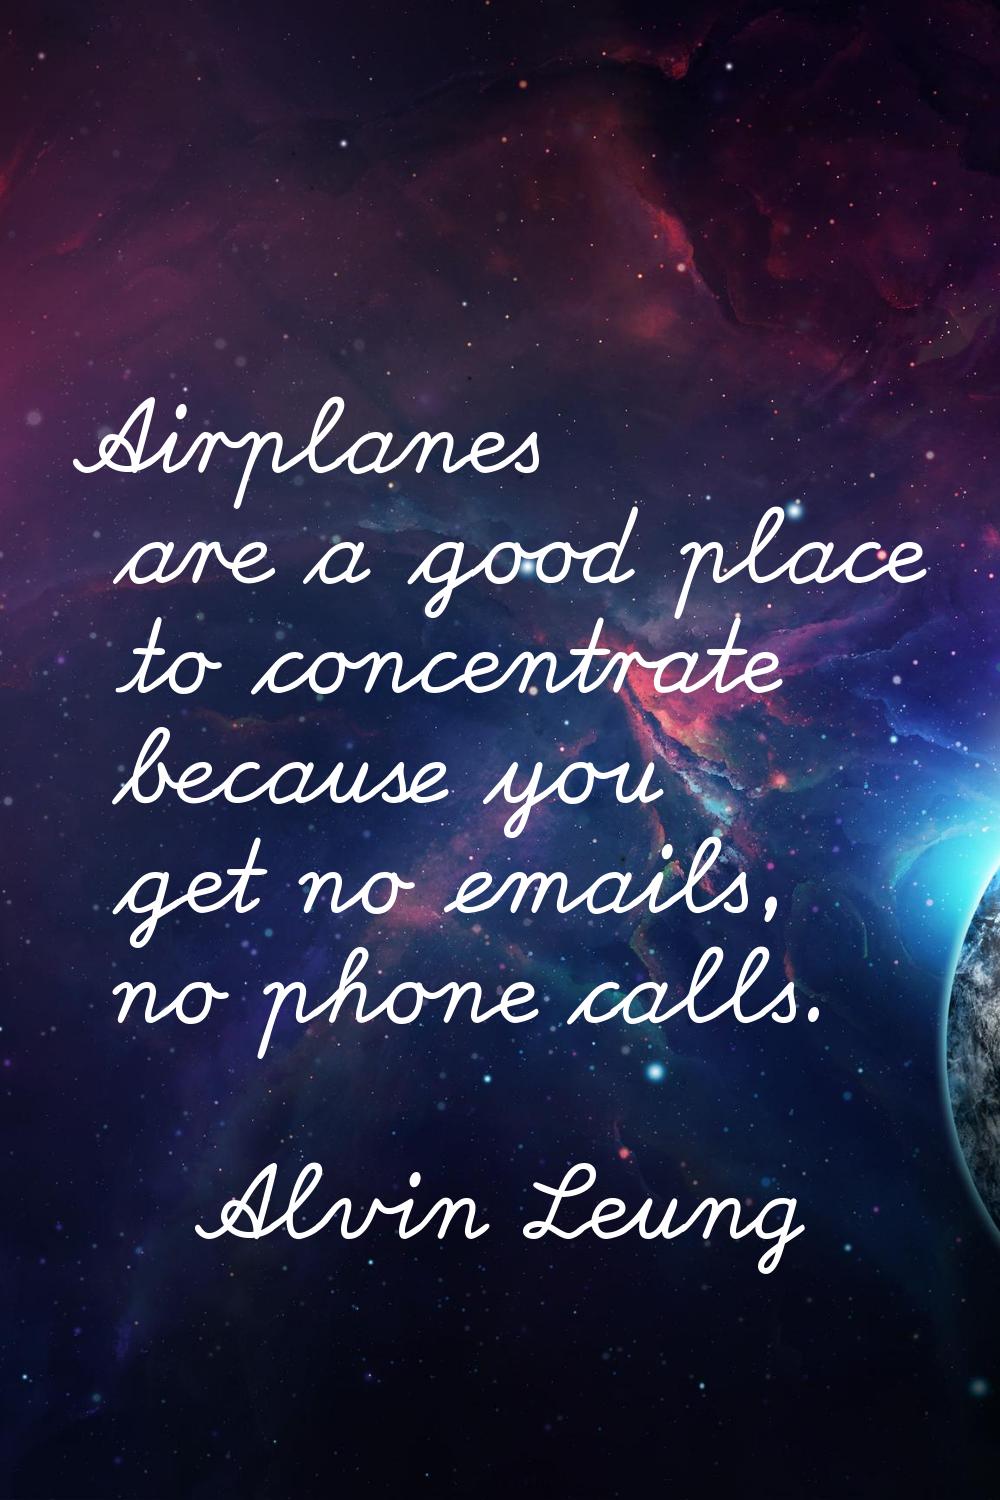 Airplanes are a good place to concentrate because you get no emails, no phone calls.